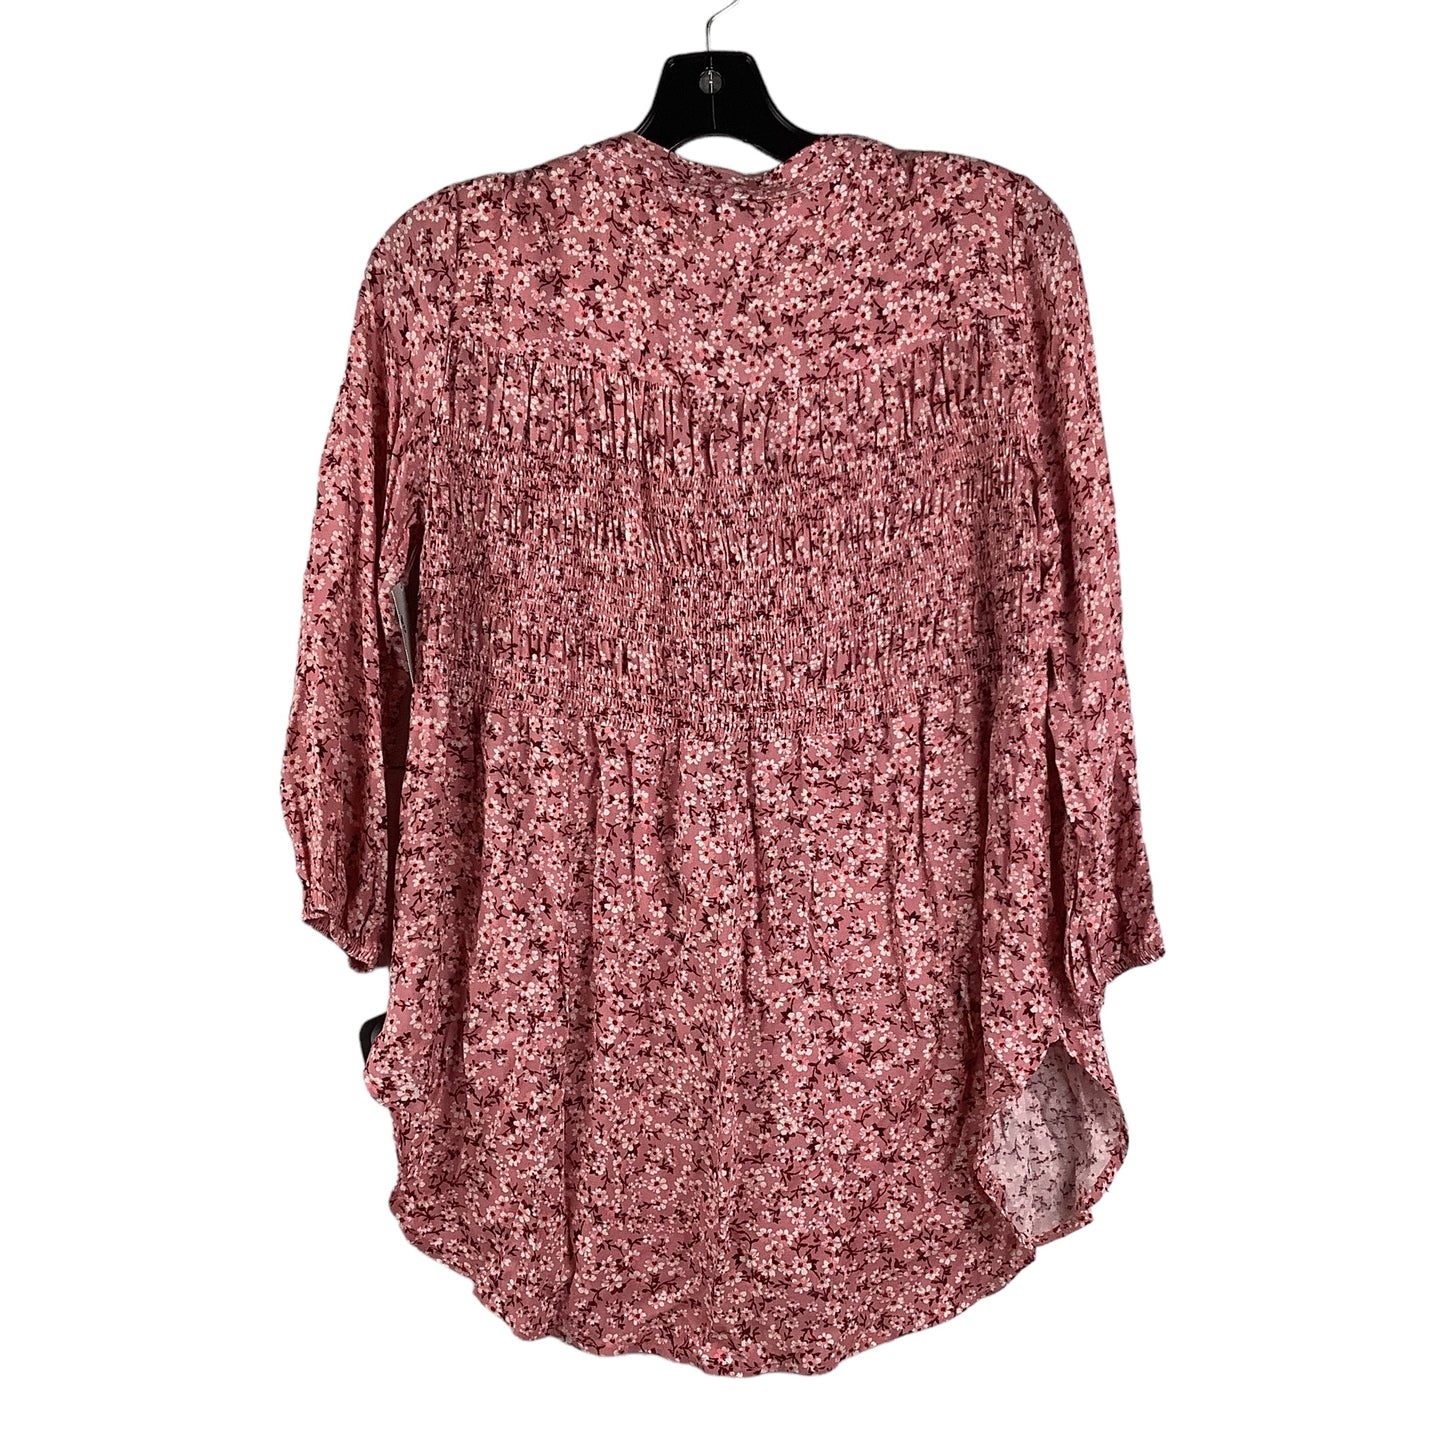 Floral Print Top Long Sleeve Knox Rose, Size Xs